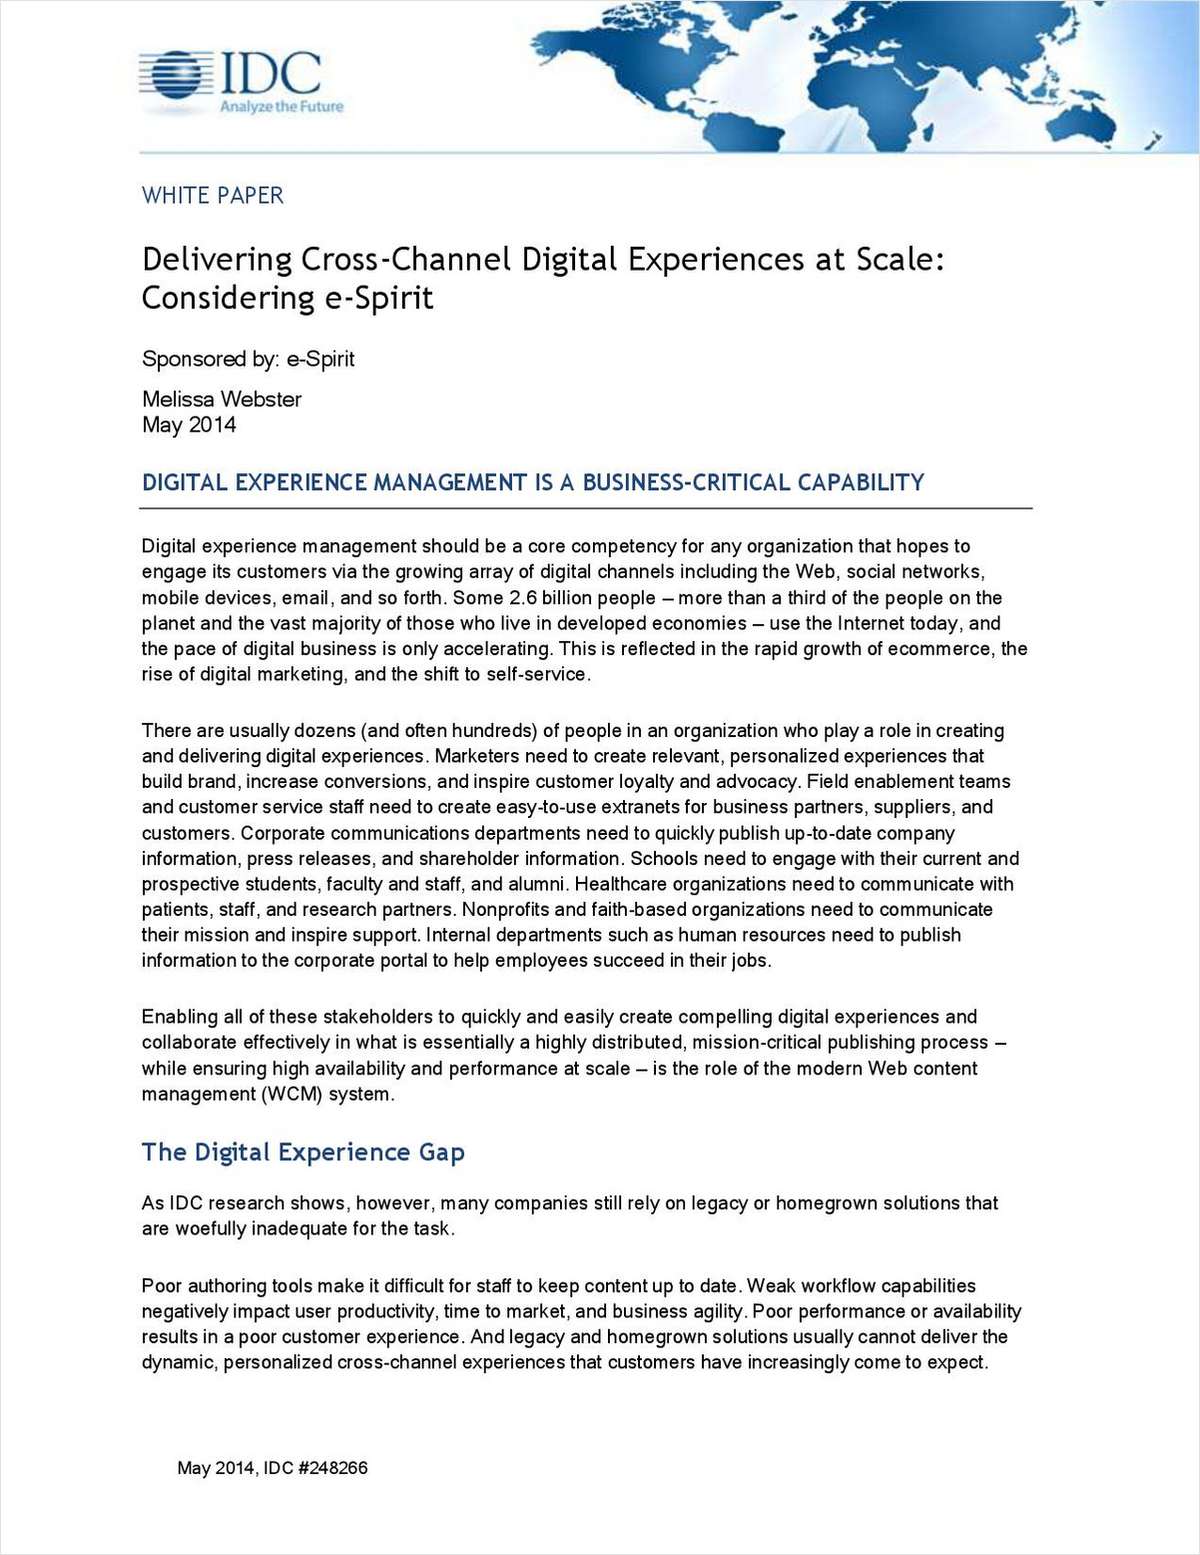 Delivering Cross-Channel Digital Experiences at Scale